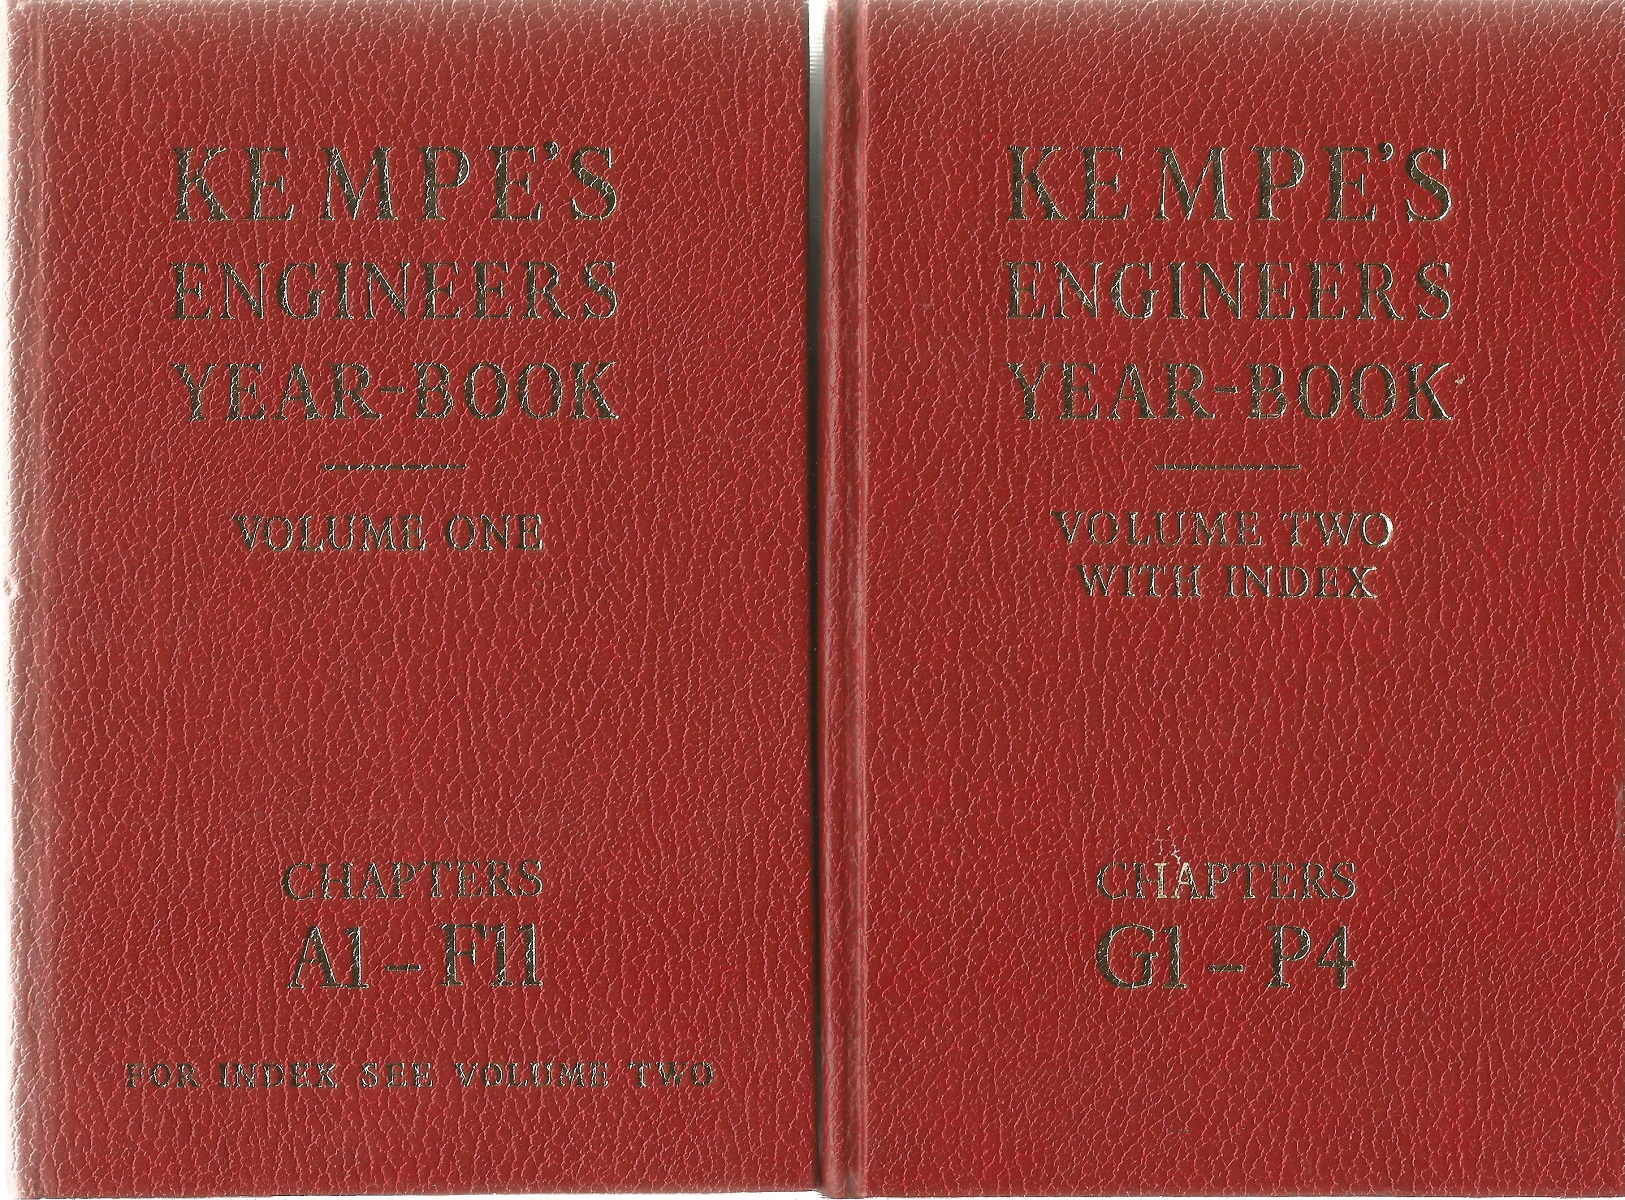 2 x Kempe's Engineers Year-Book 1981 86th edition published by Morgan-Grampian book publishing Co